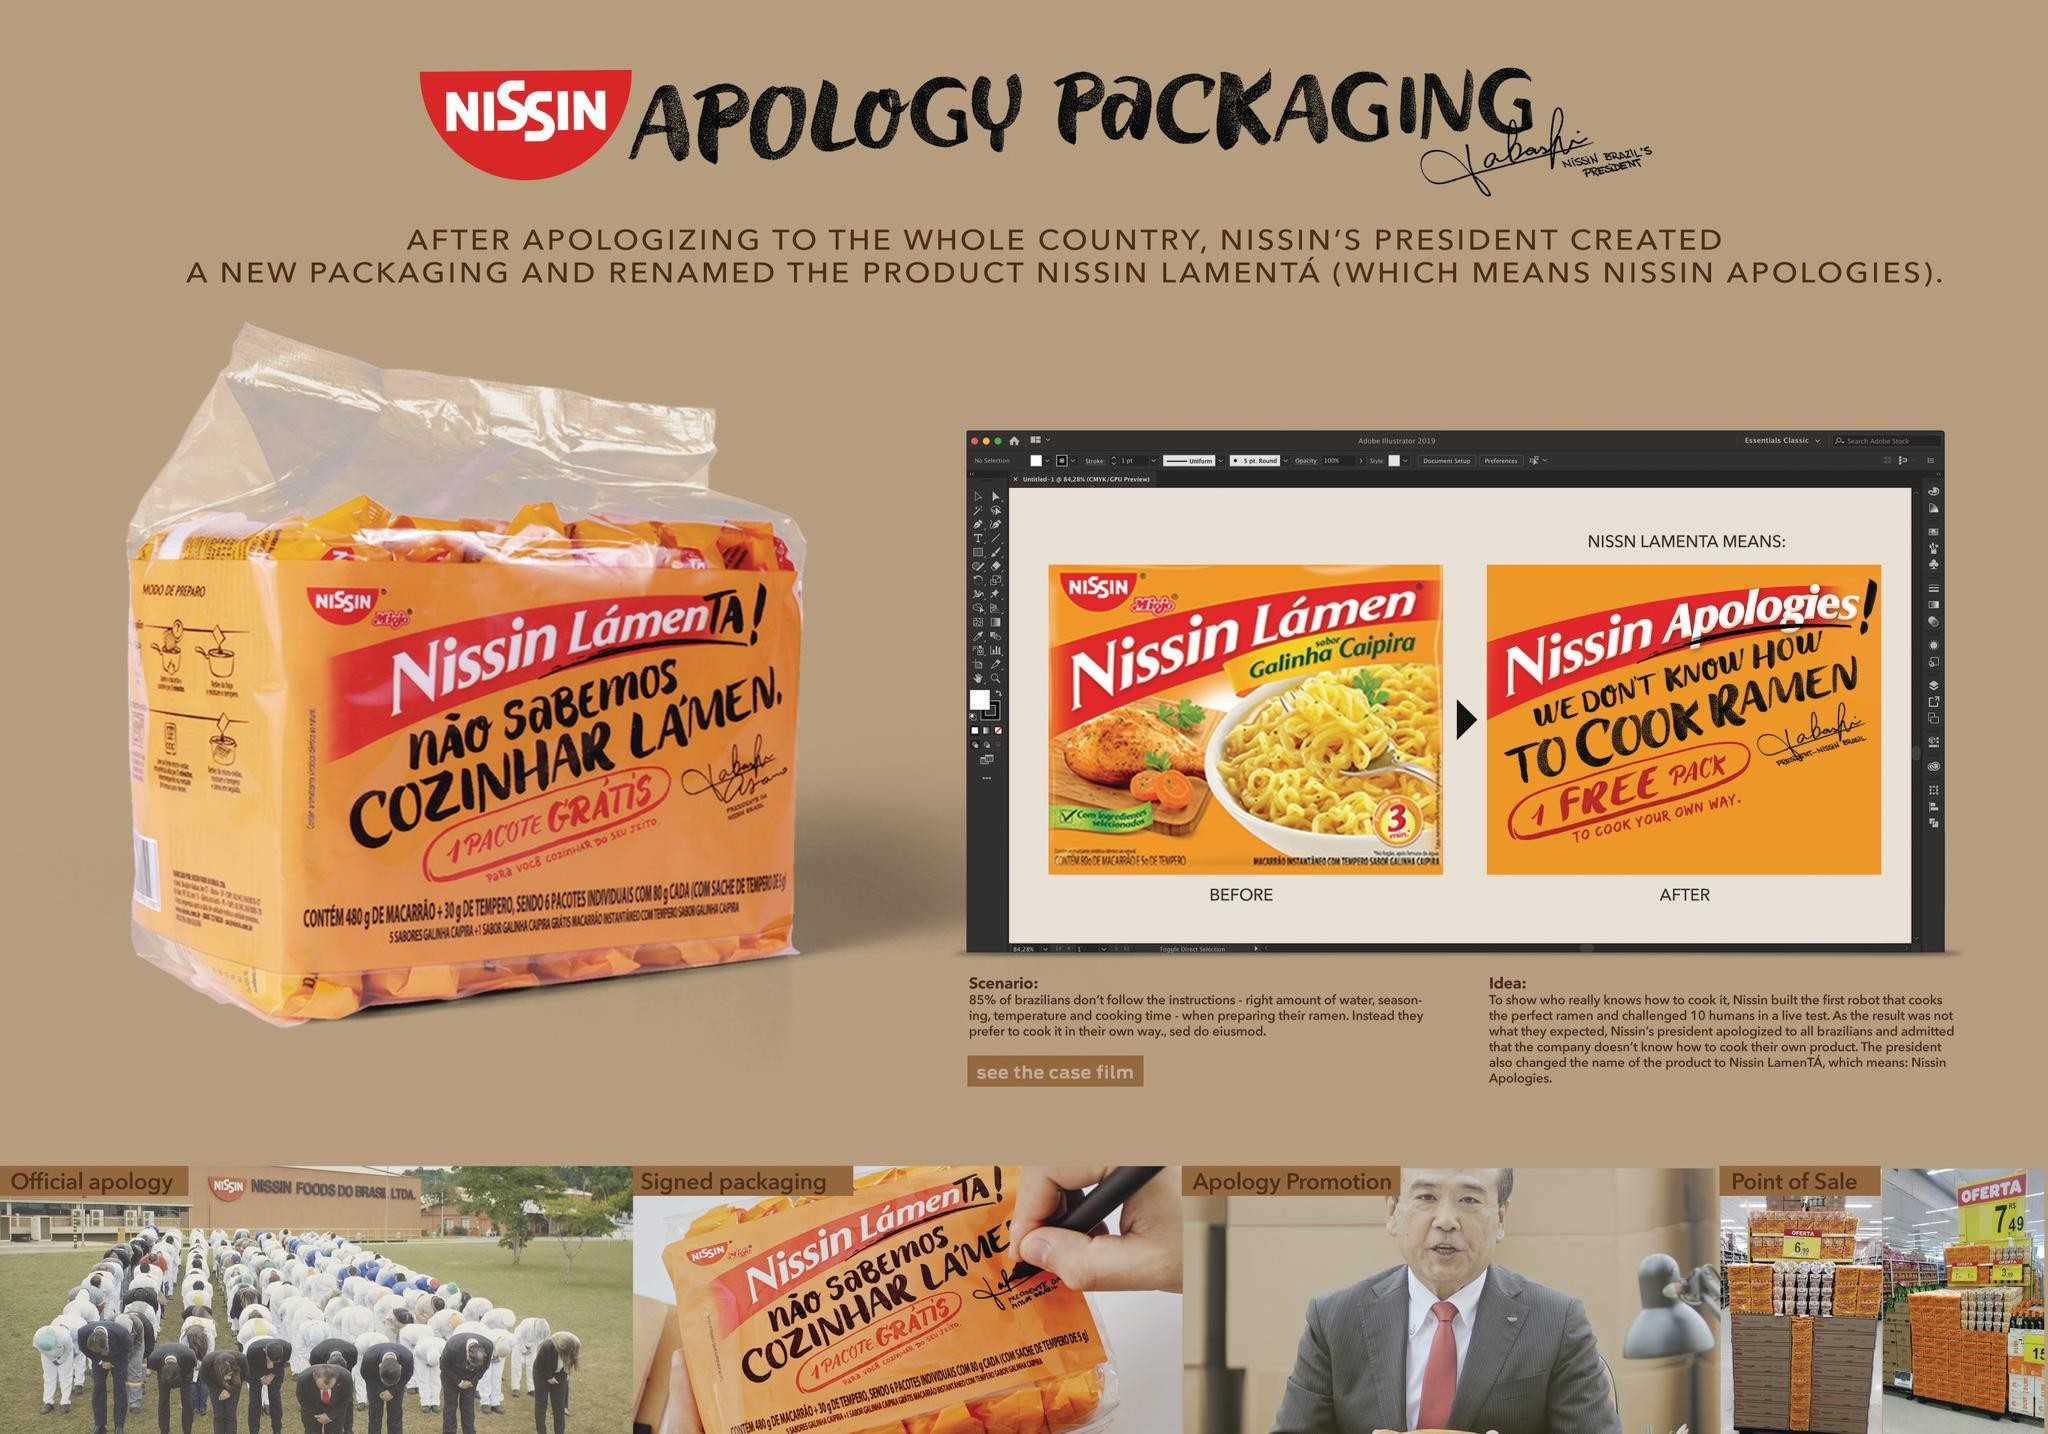 NISSIN - THE APOLOGY